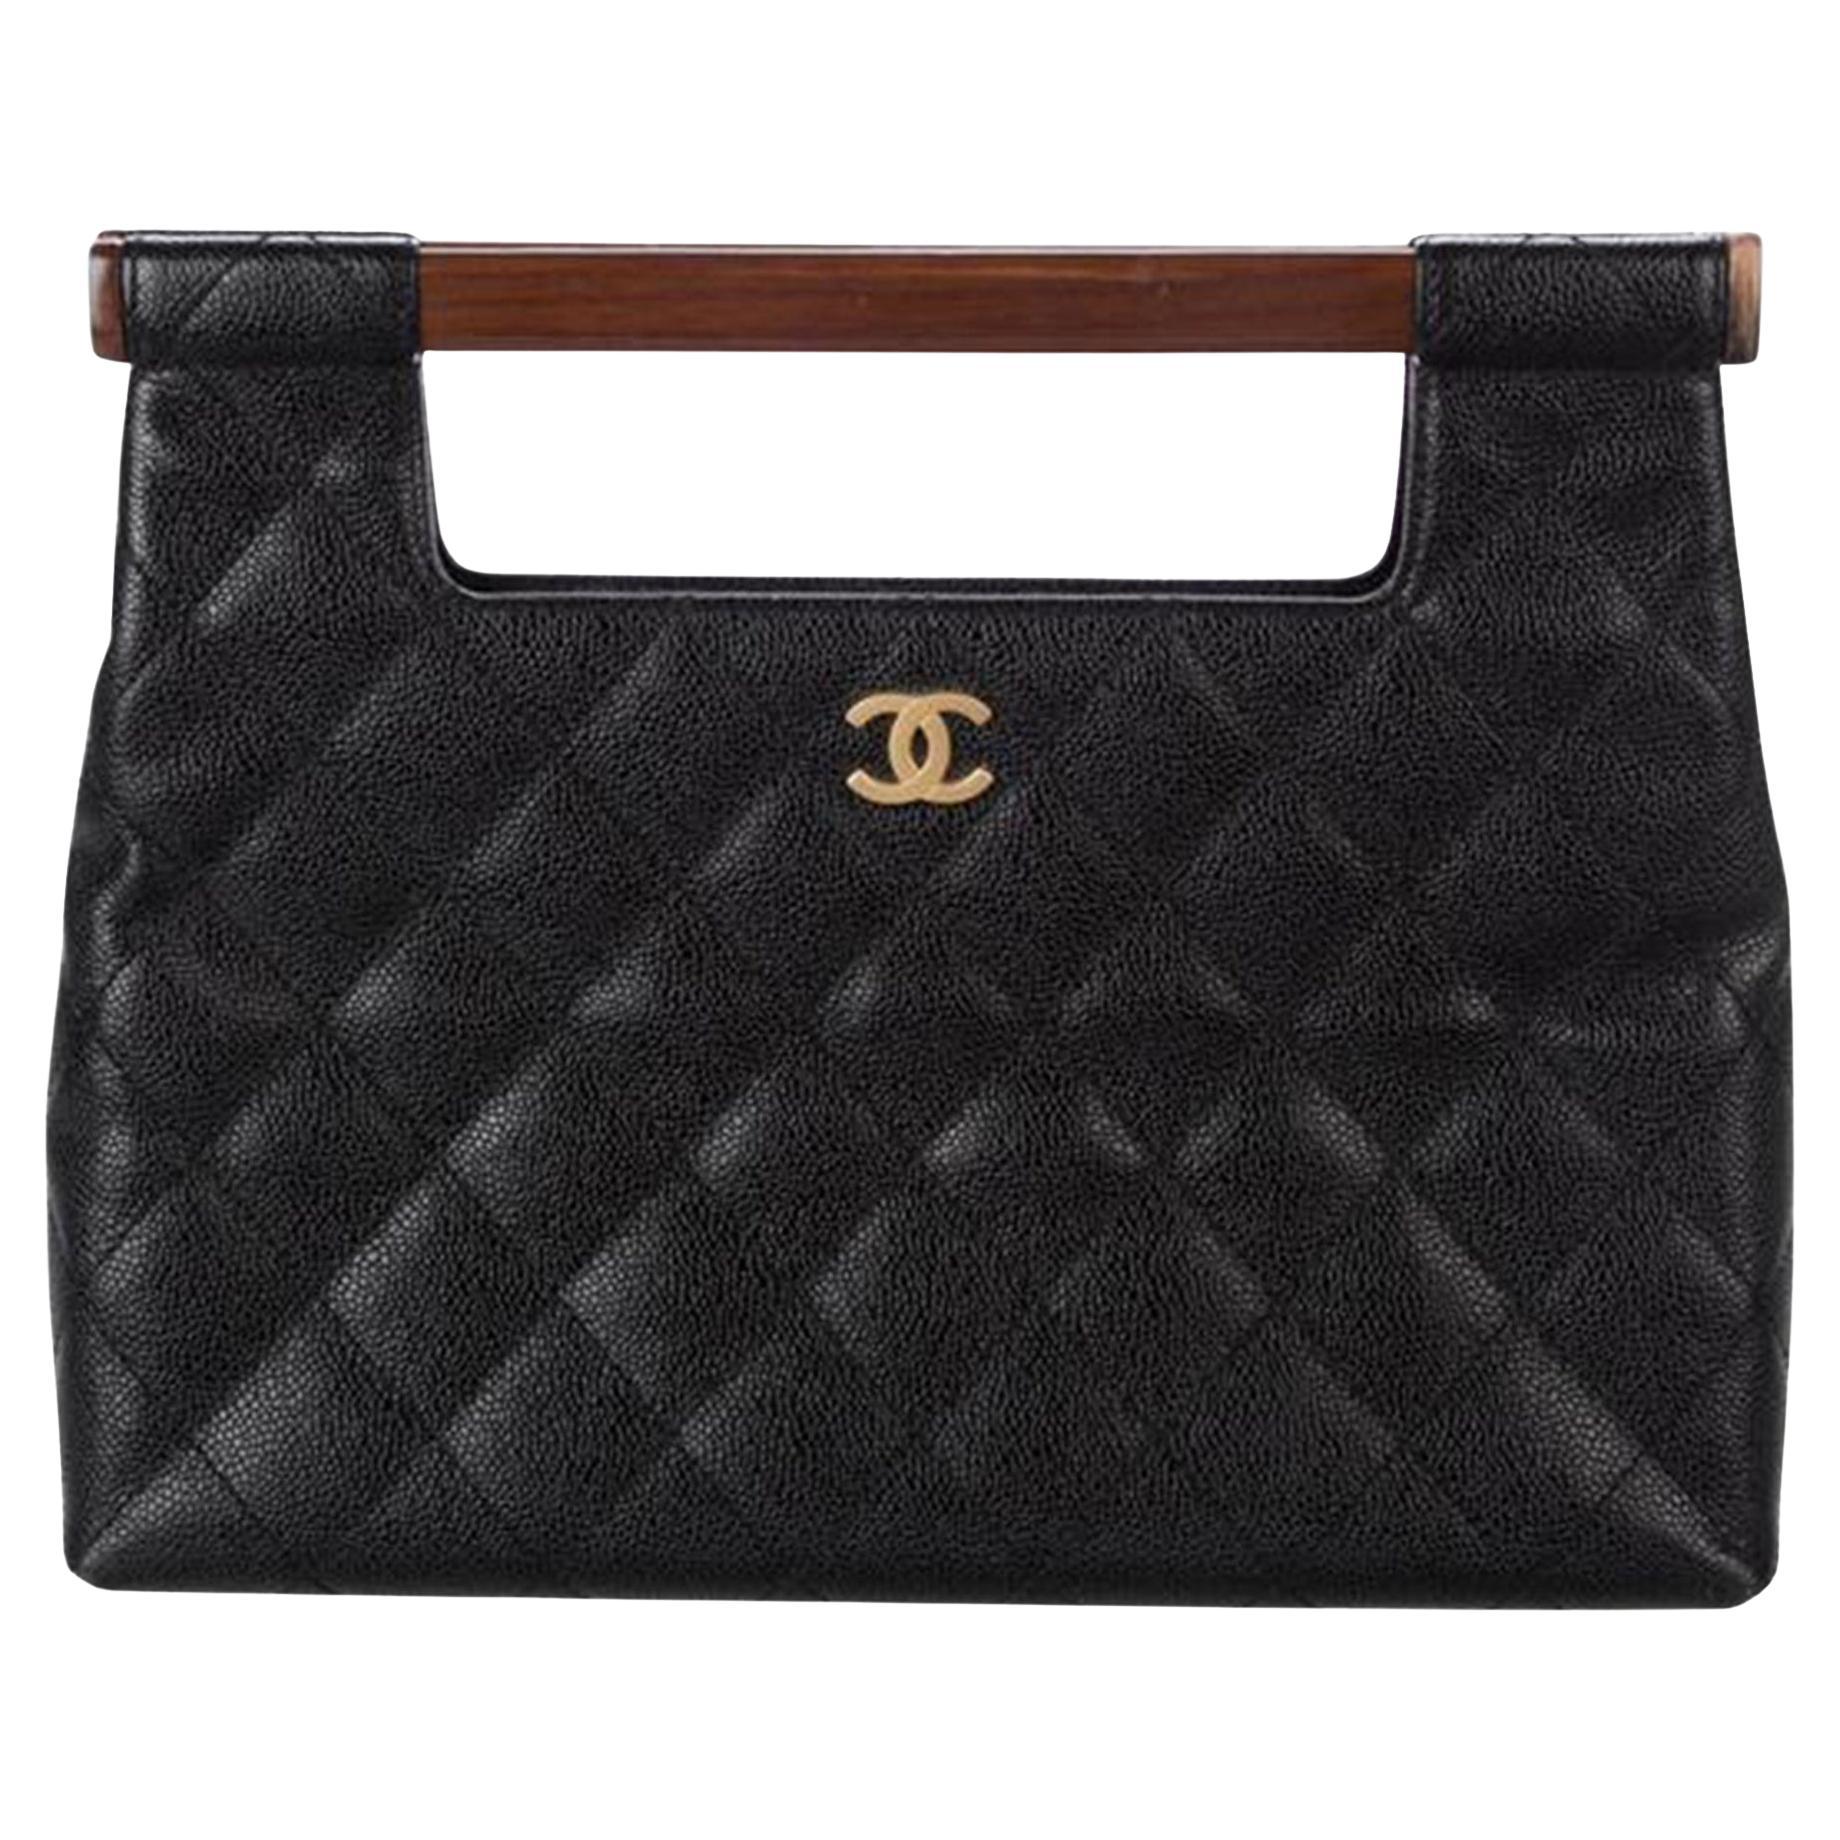 Chanel 2003 Wood Top Handle Kelly Rare Vintage Black Caviar Leather Clutch Bag For Sale